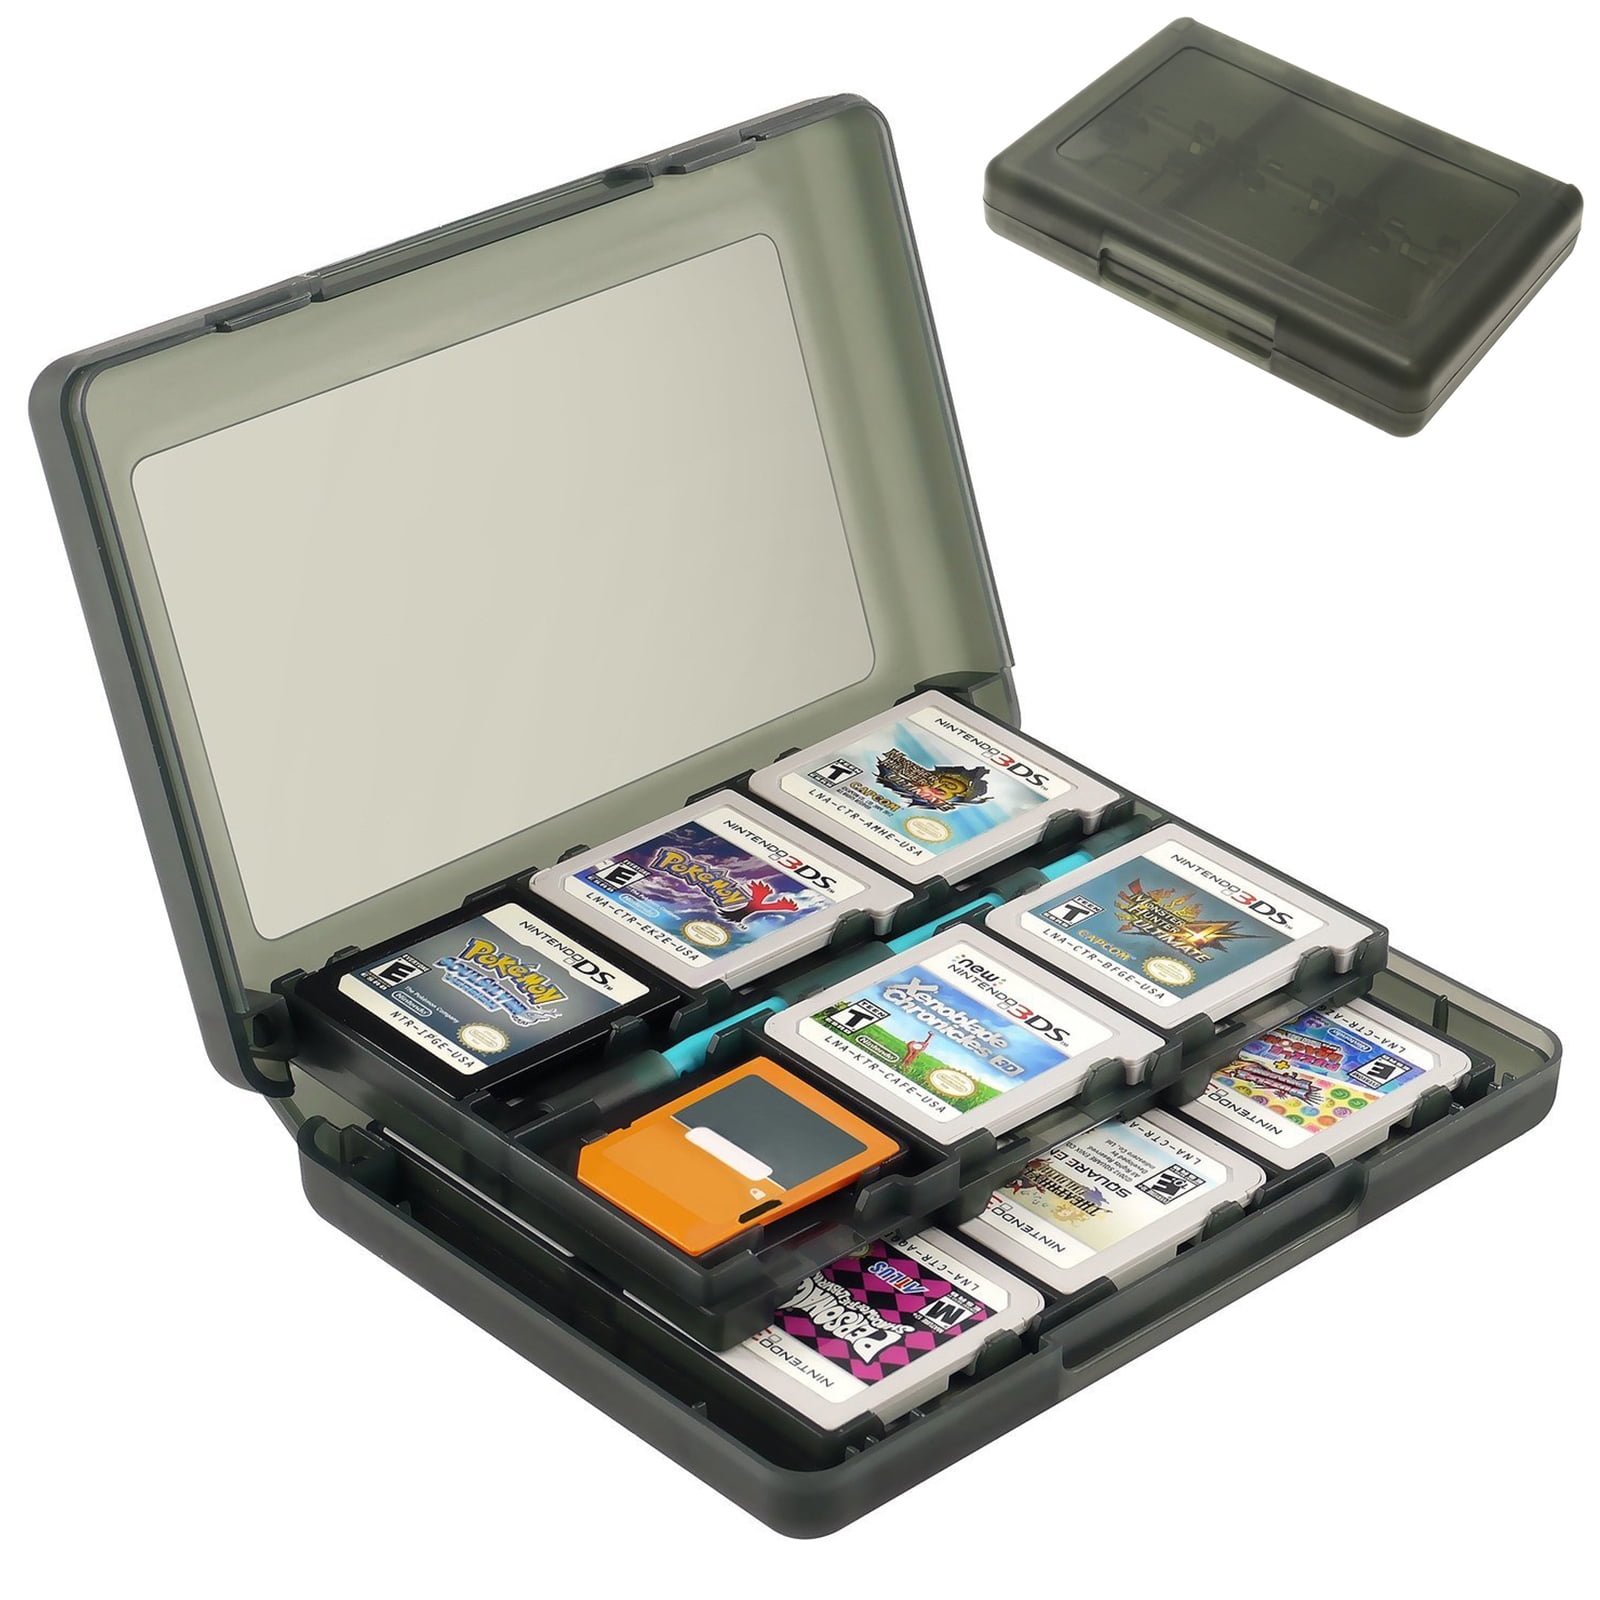 TSV 28 in 1 Game Card Case Holder Fit for New 3DS / 3DS / Dsi / Dsi XL / Dsi LL/ DS / DS Lite, Game Card Carrying Case, TF